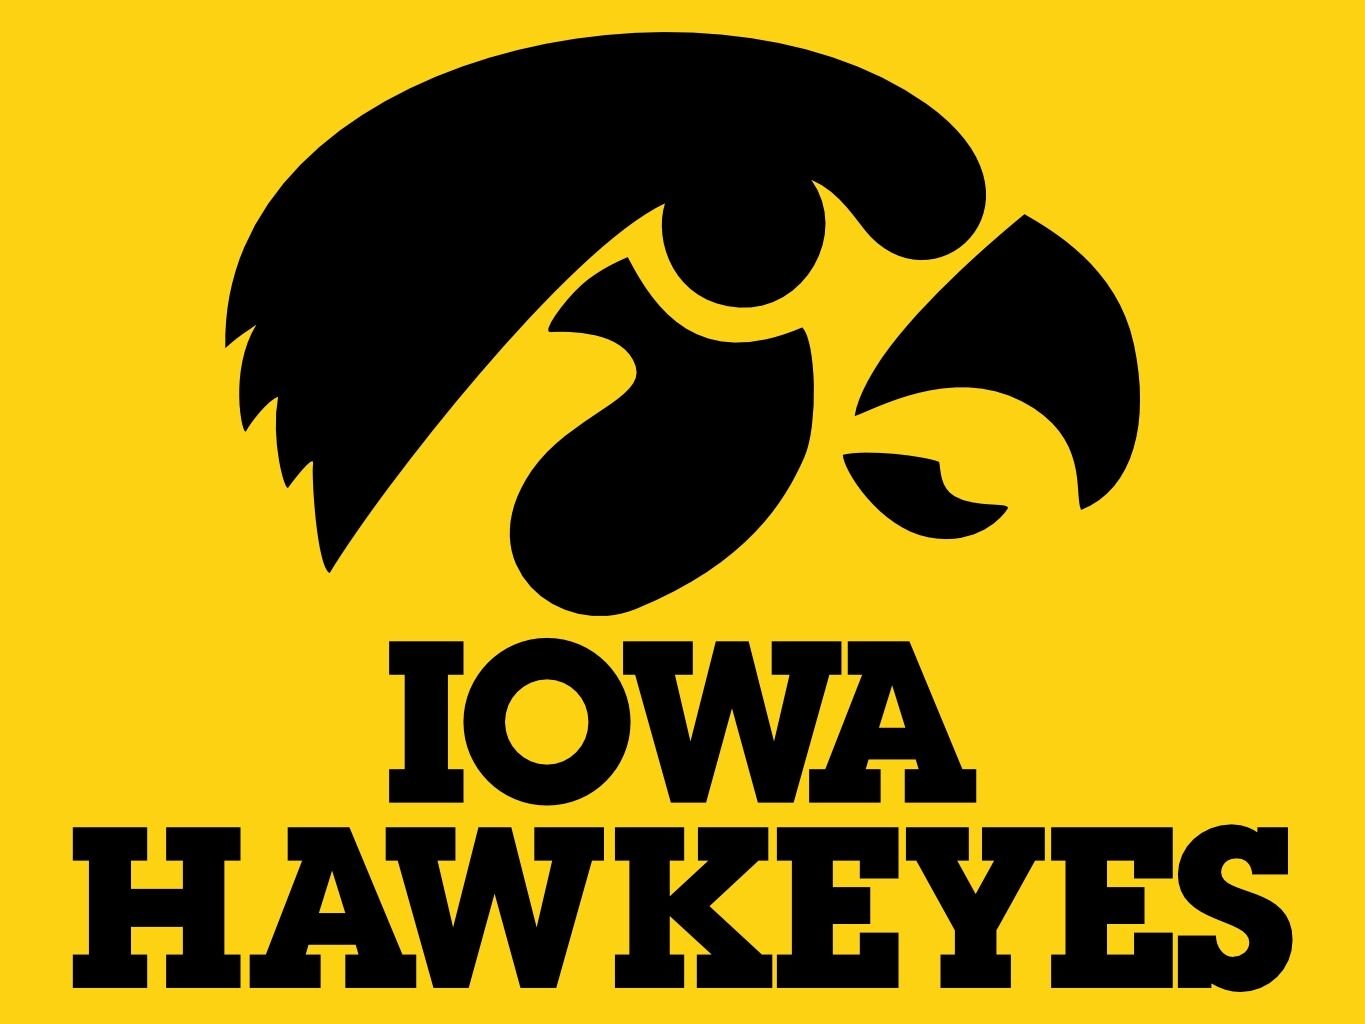 Sandfort's triple-double propels Iowa to 90-81 victory over Penn State, News